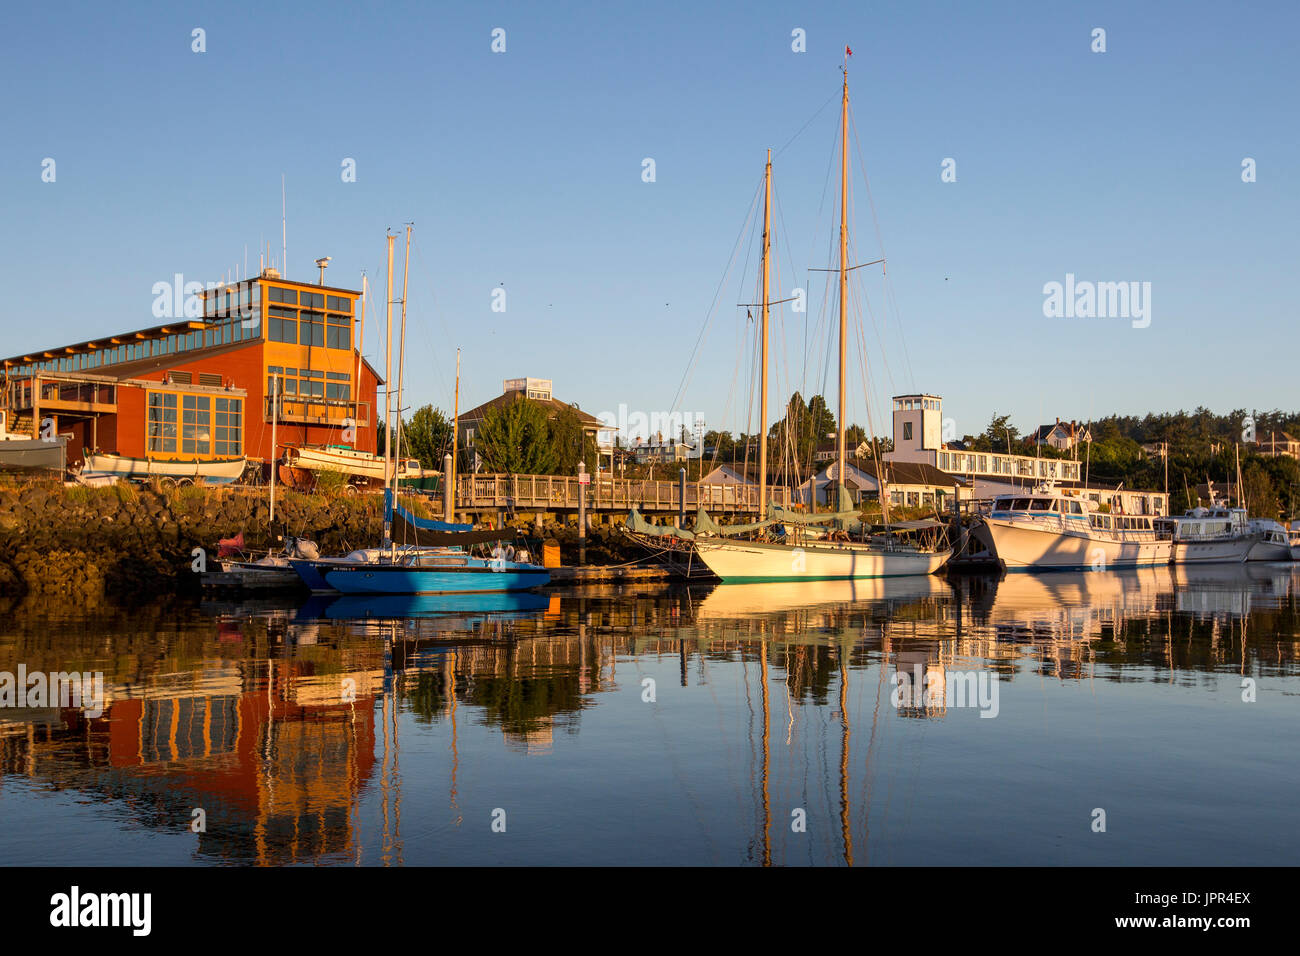 Port Townsend marina at Point Hudson with schooner sailing boat Martha during sunrise. Northwest Maritime Center in background. Stock Photo